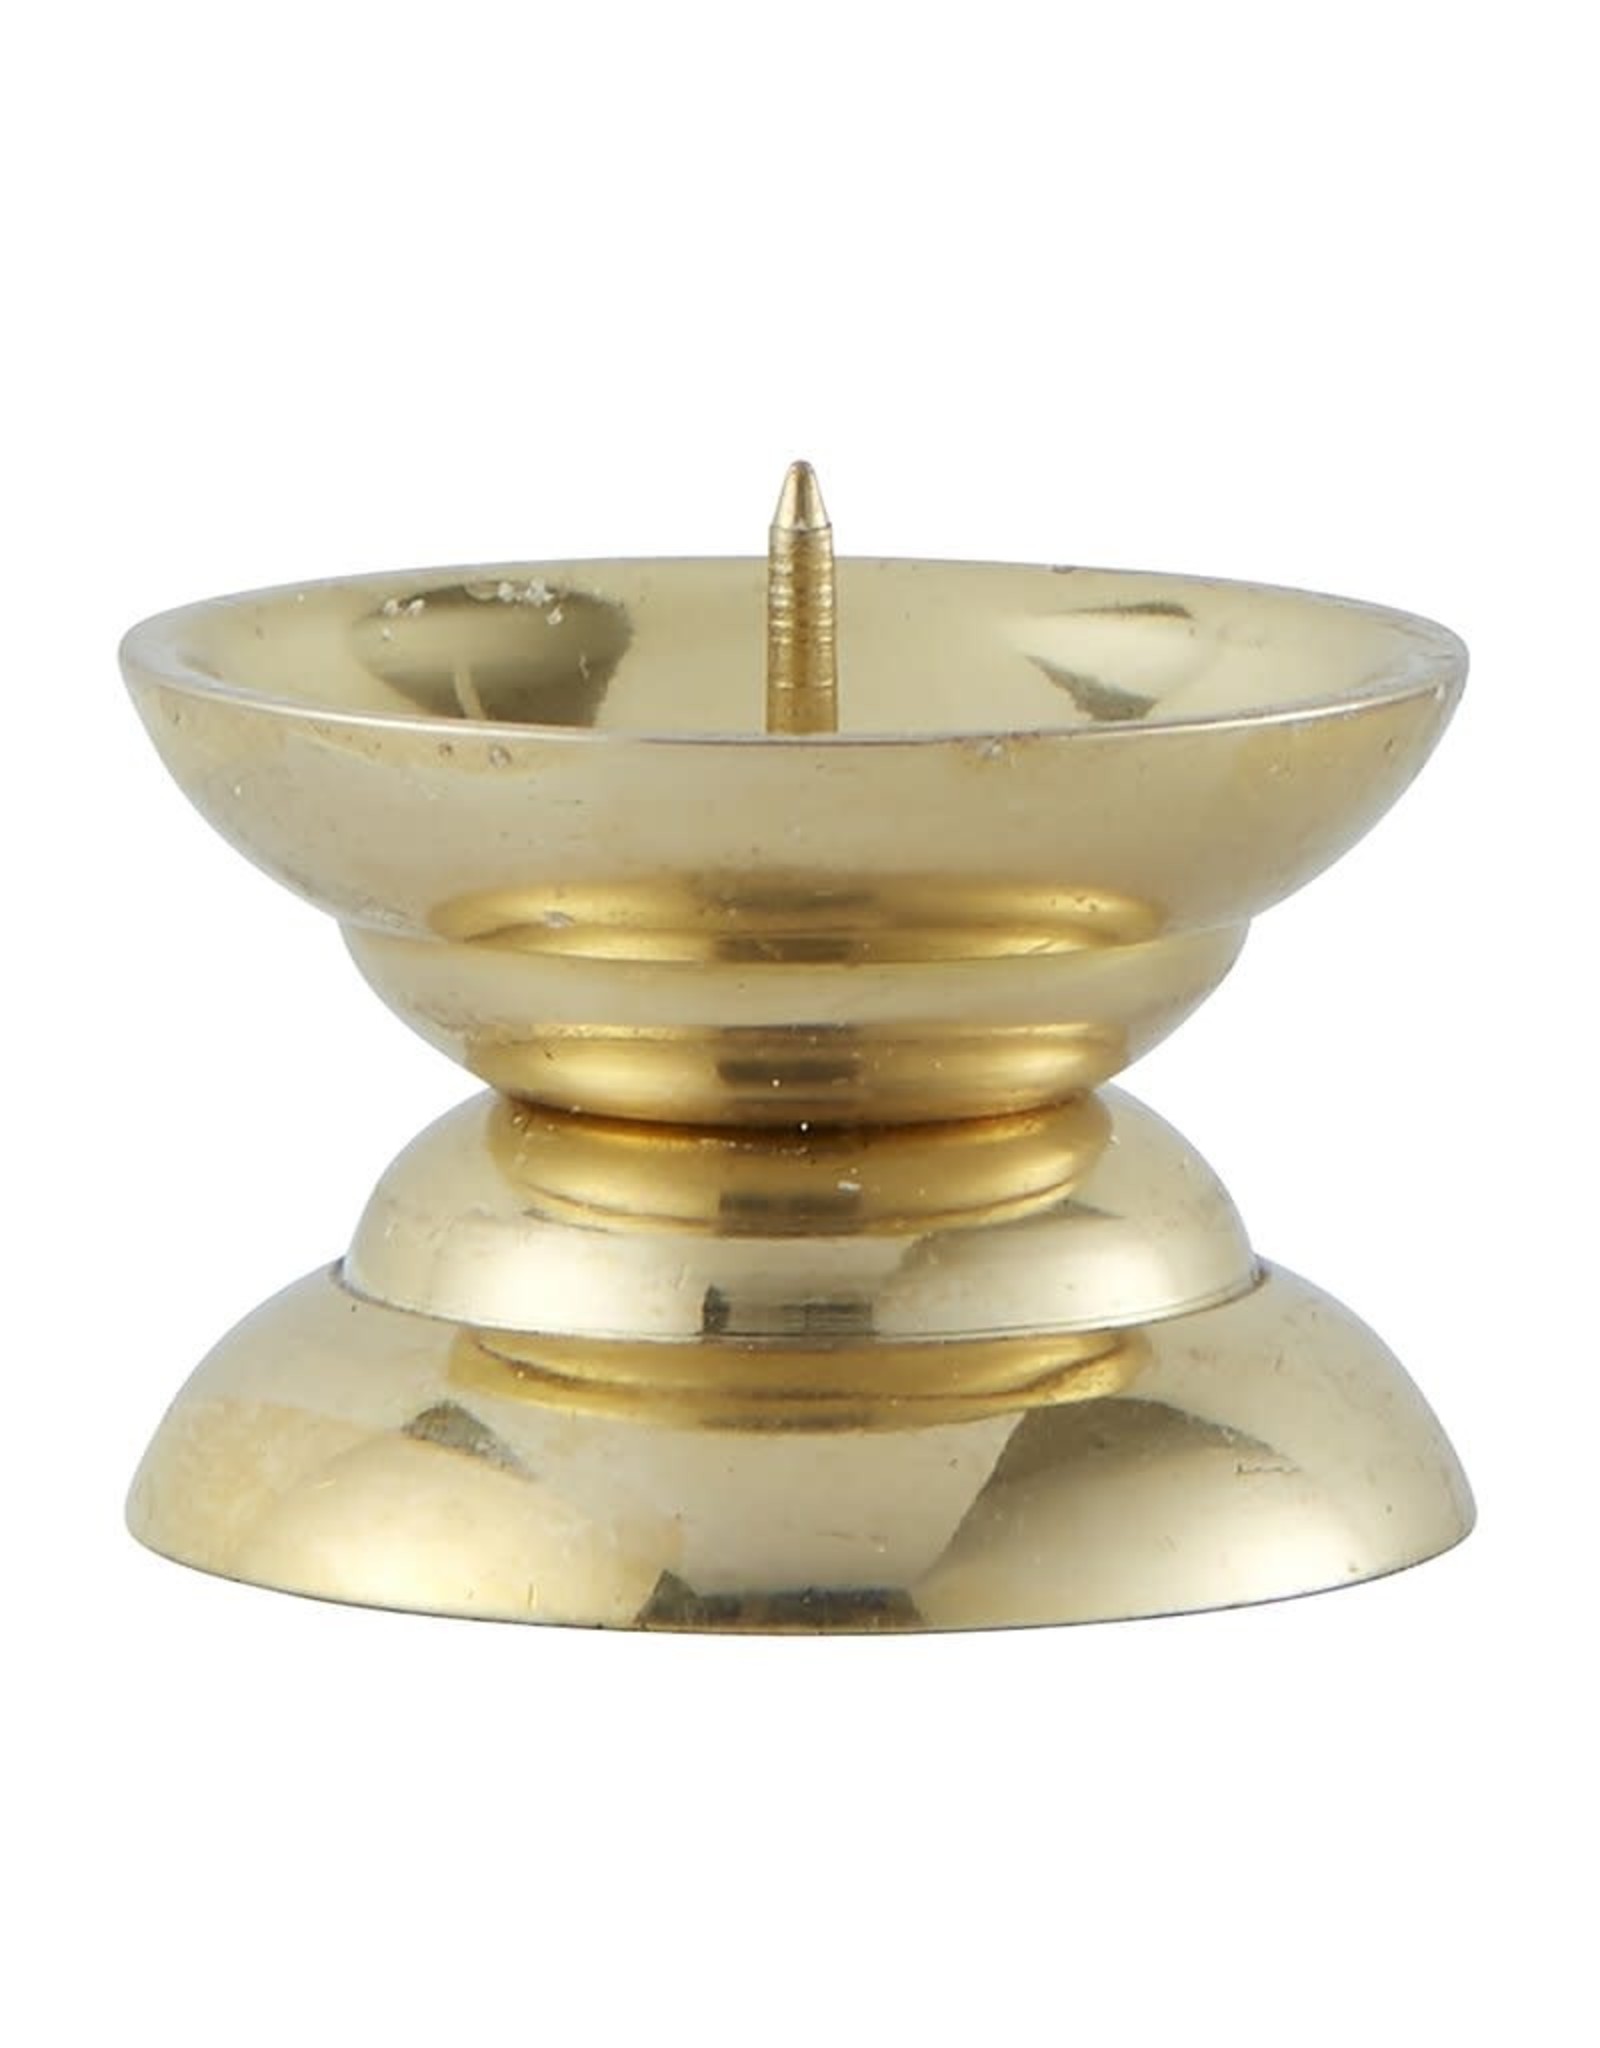 Christian Brands 10 Minute Candle Holder